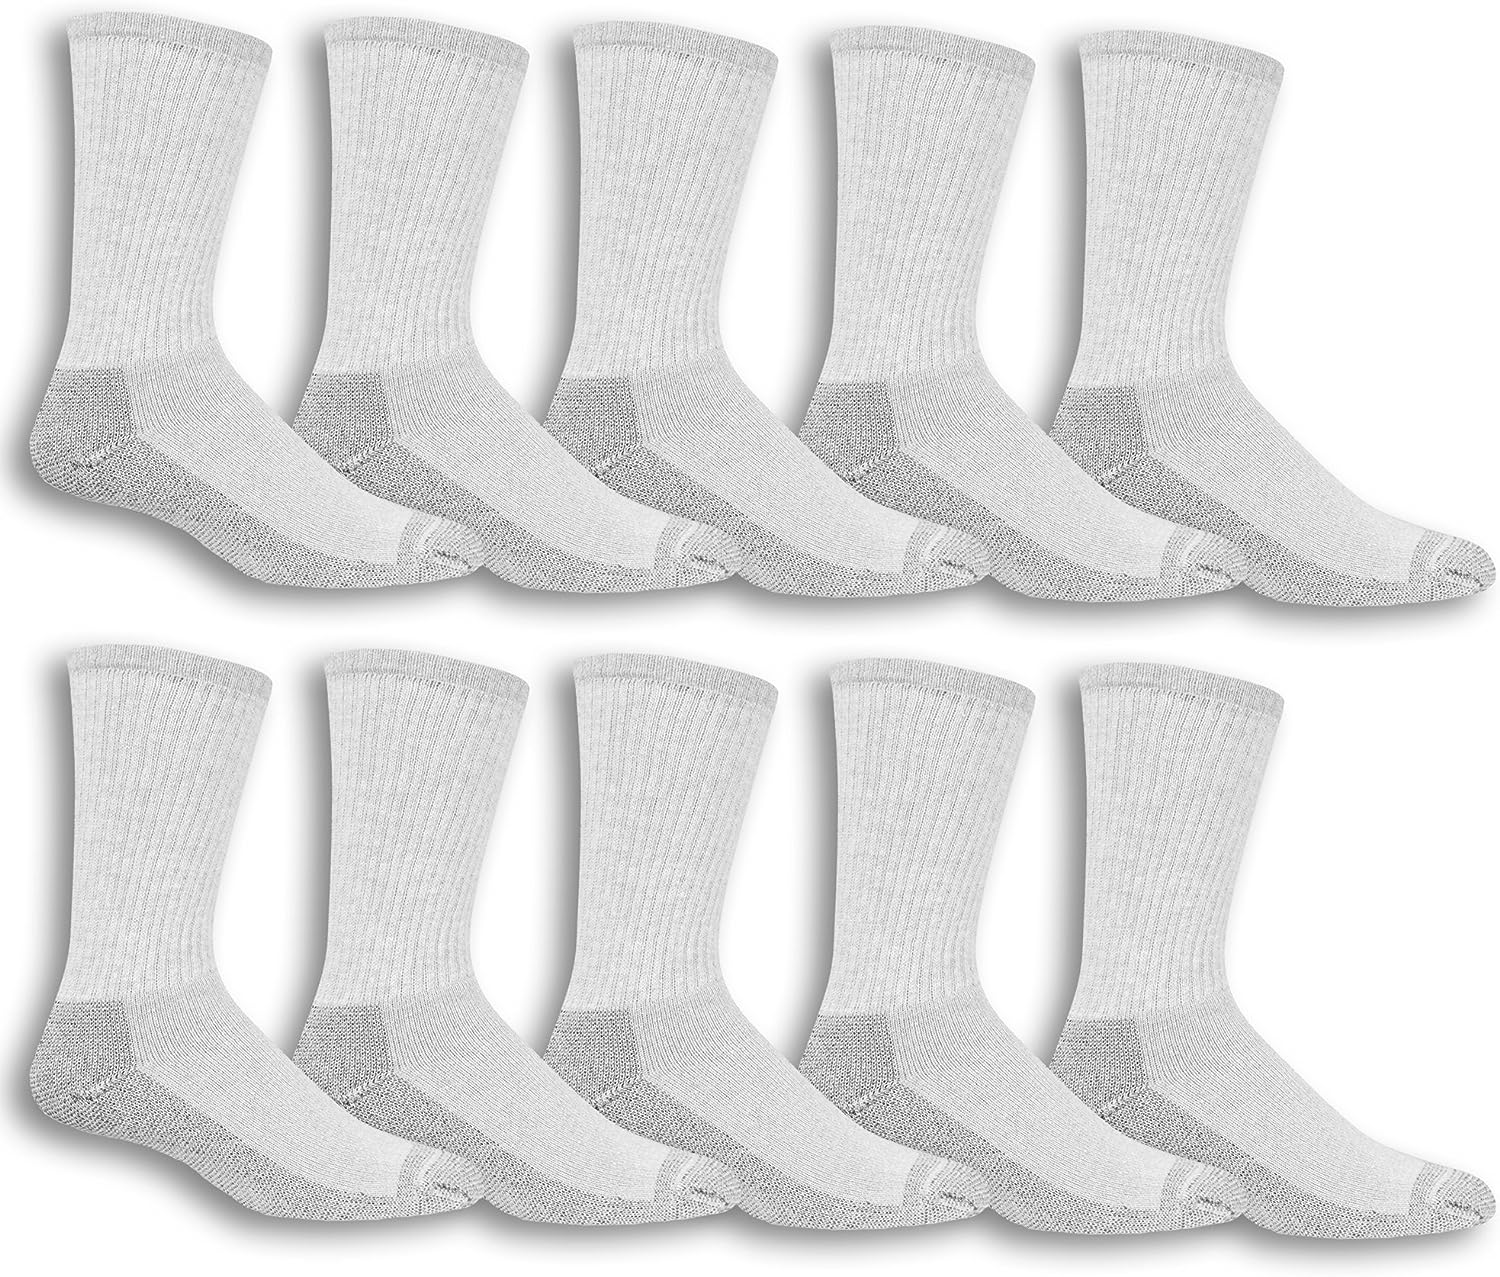 work socks ever detailed review